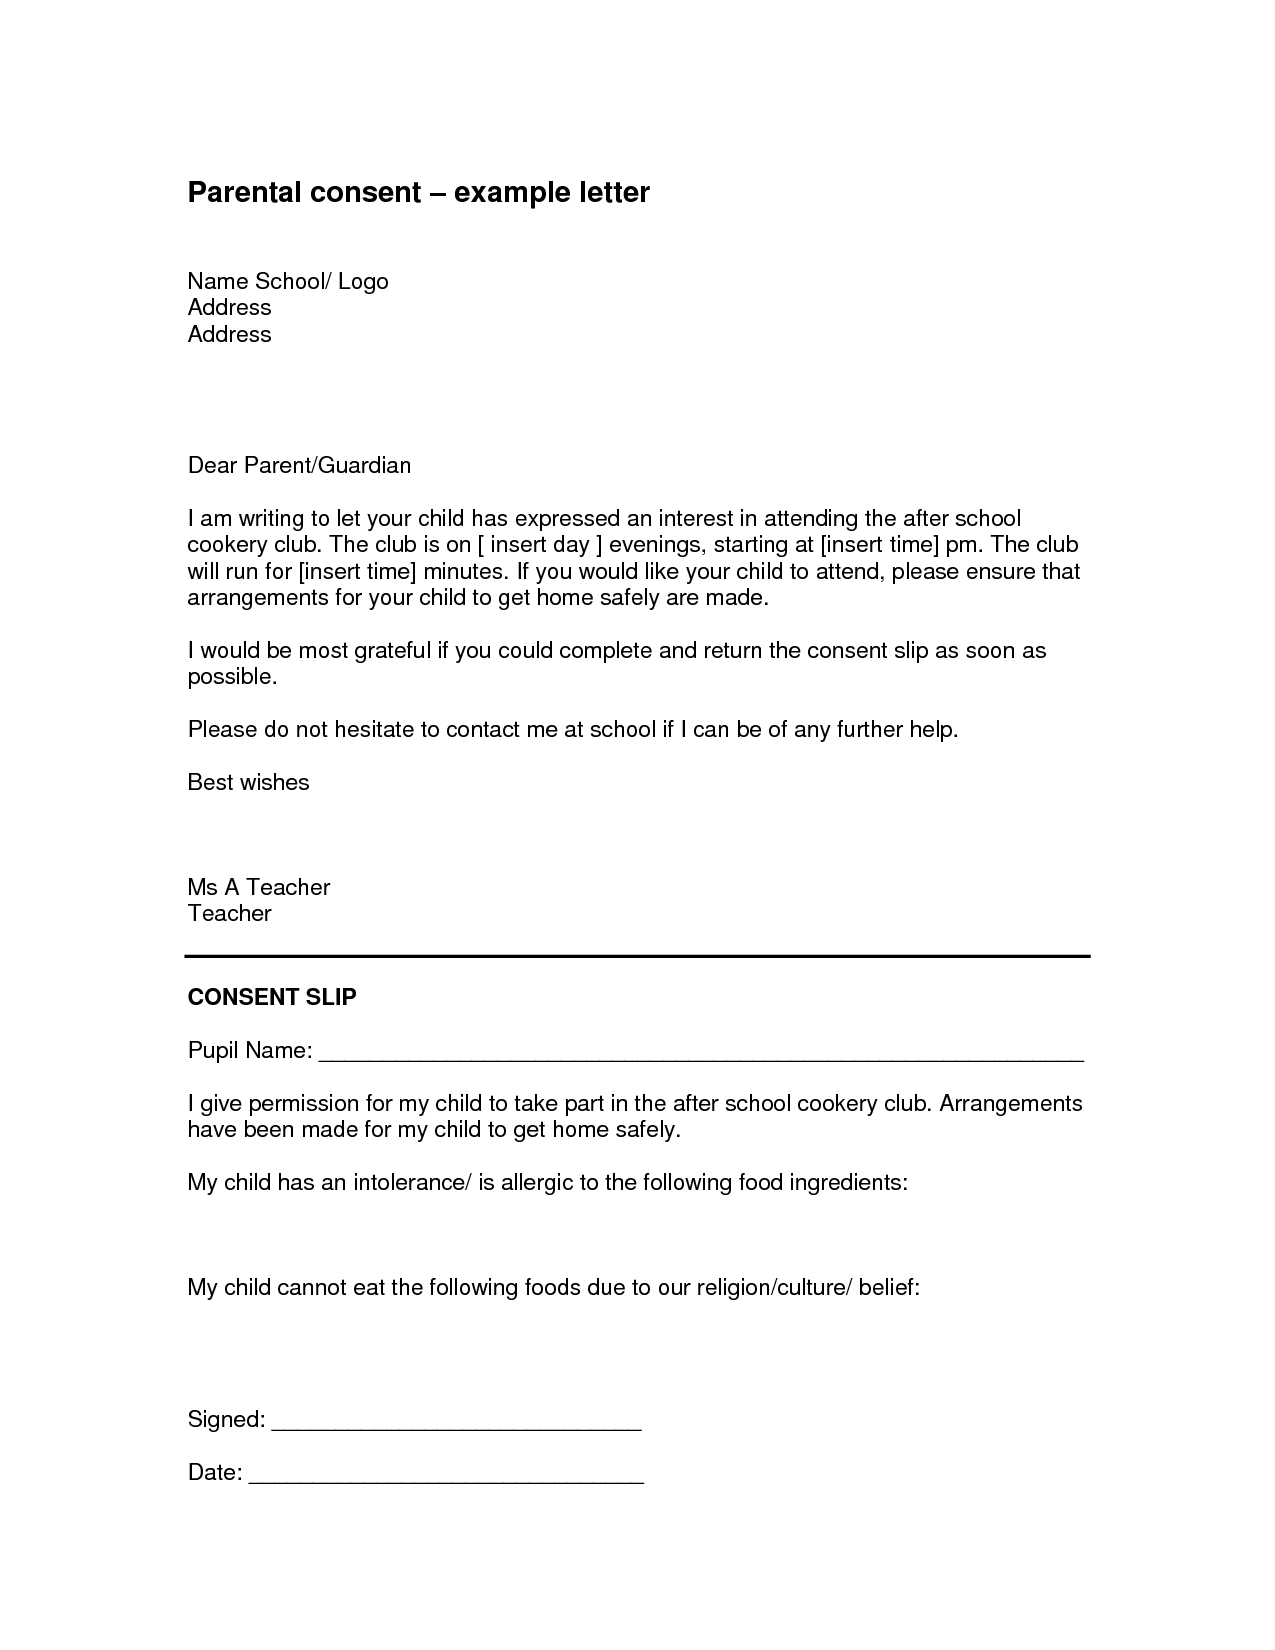 Parental Consent Permission Letter Template Examples Letter Template Collection